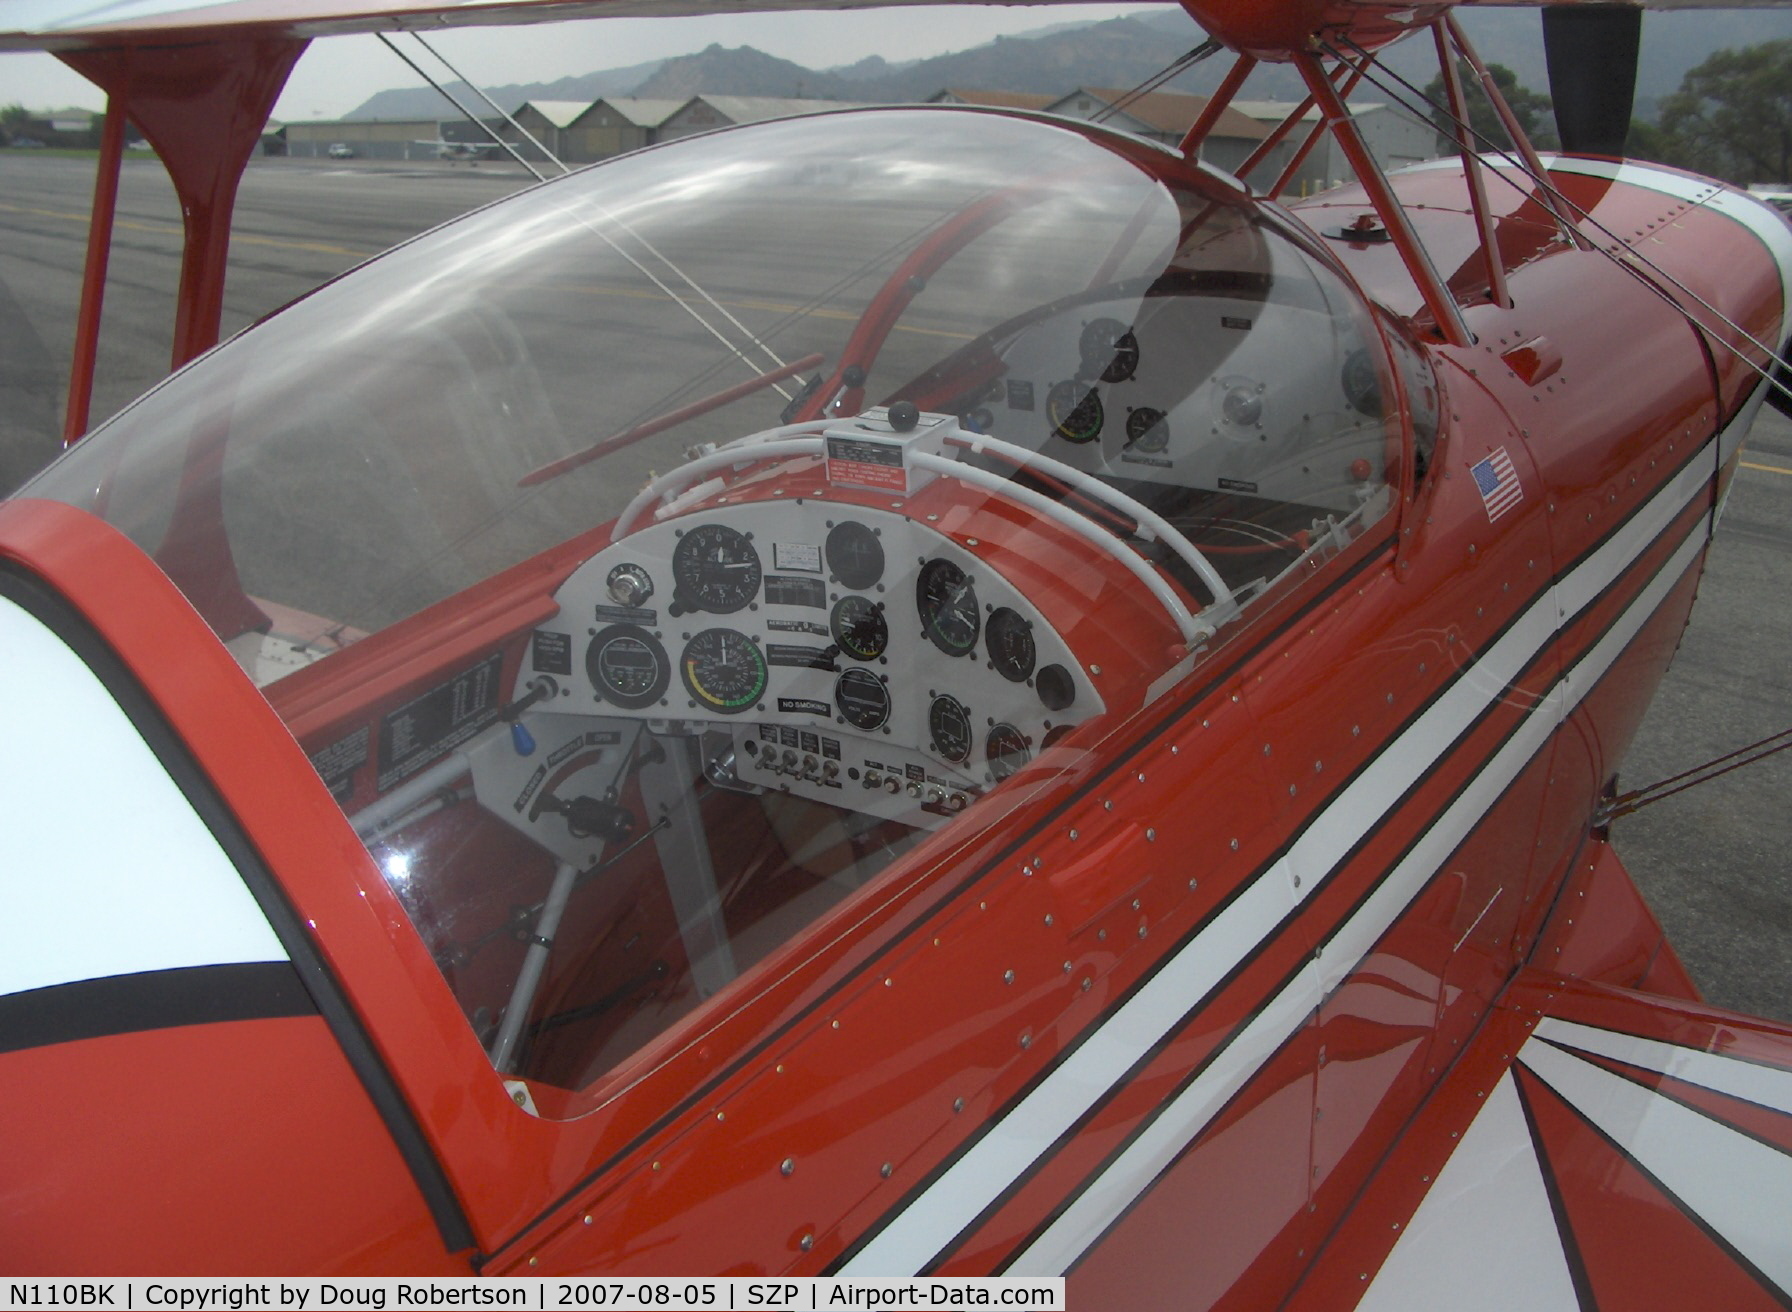 N110BK, 2007 Aviat Pitts S-2C Special C/N 6077, Aviat PITTS S-2C, Lycoming AEIO-540-D4A5 260 Hp, panels